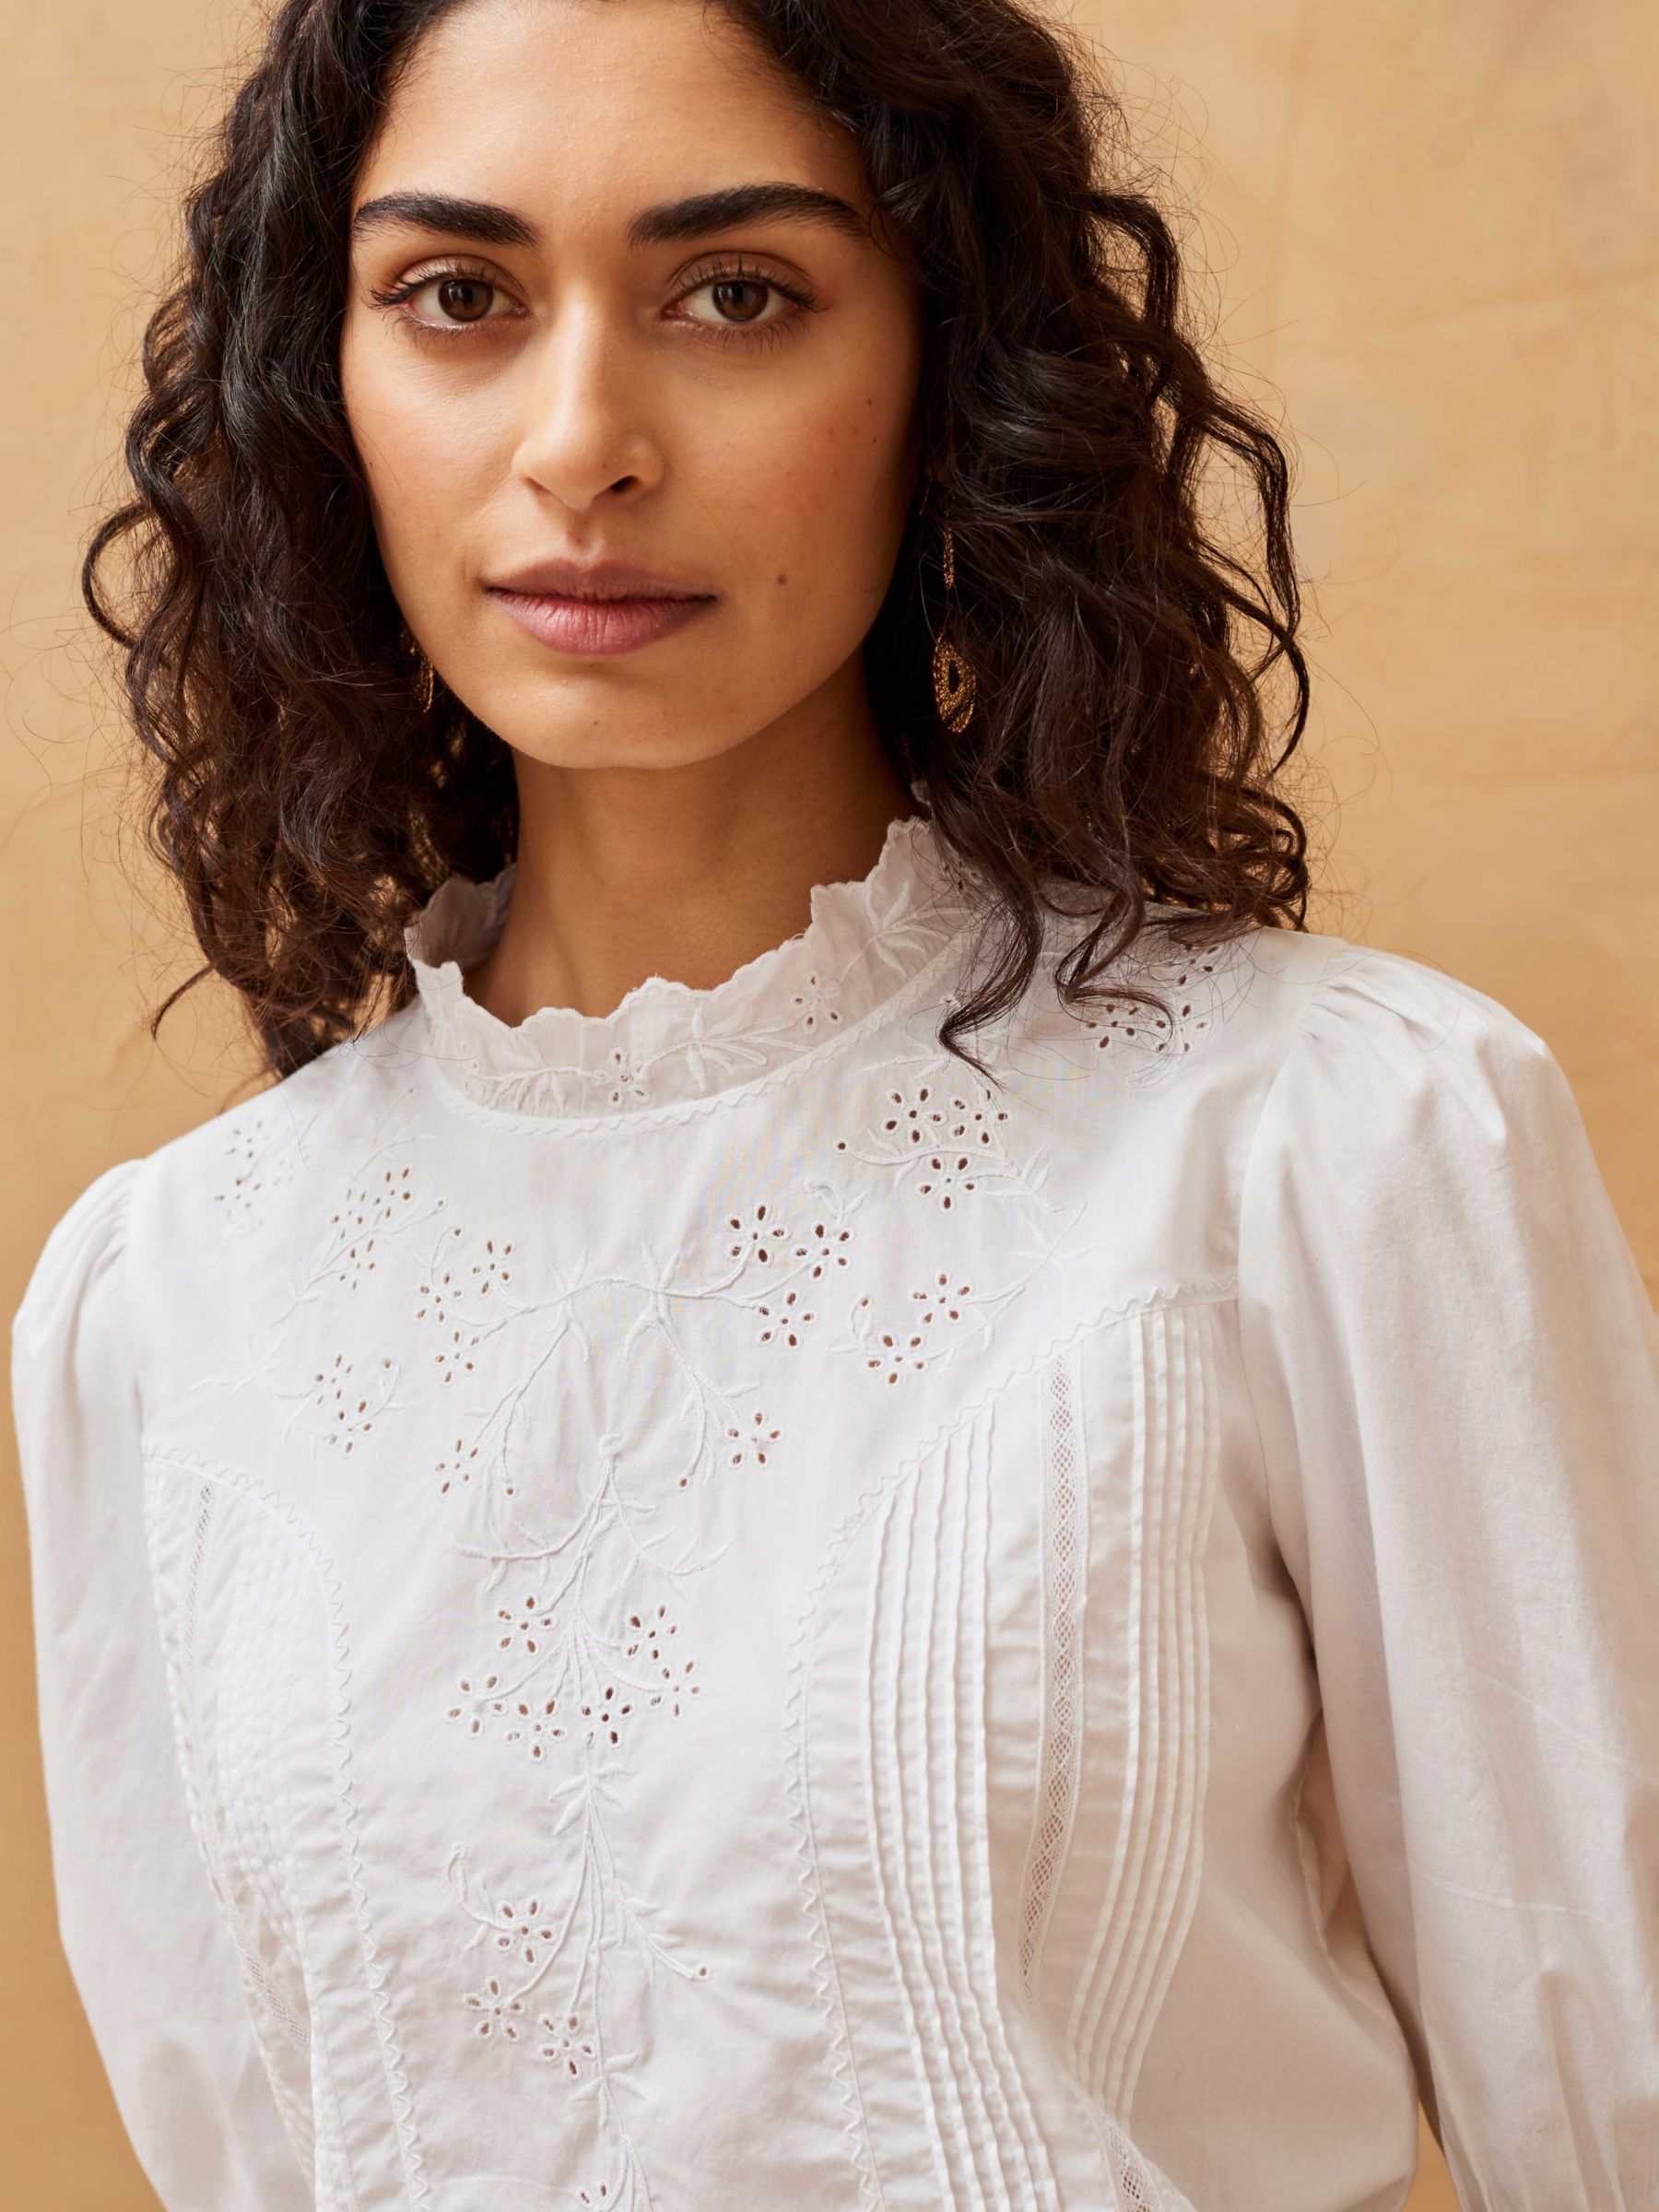 Buy Brora Organic Cotton Embroidered Blouse, White Online at johnlewis.com